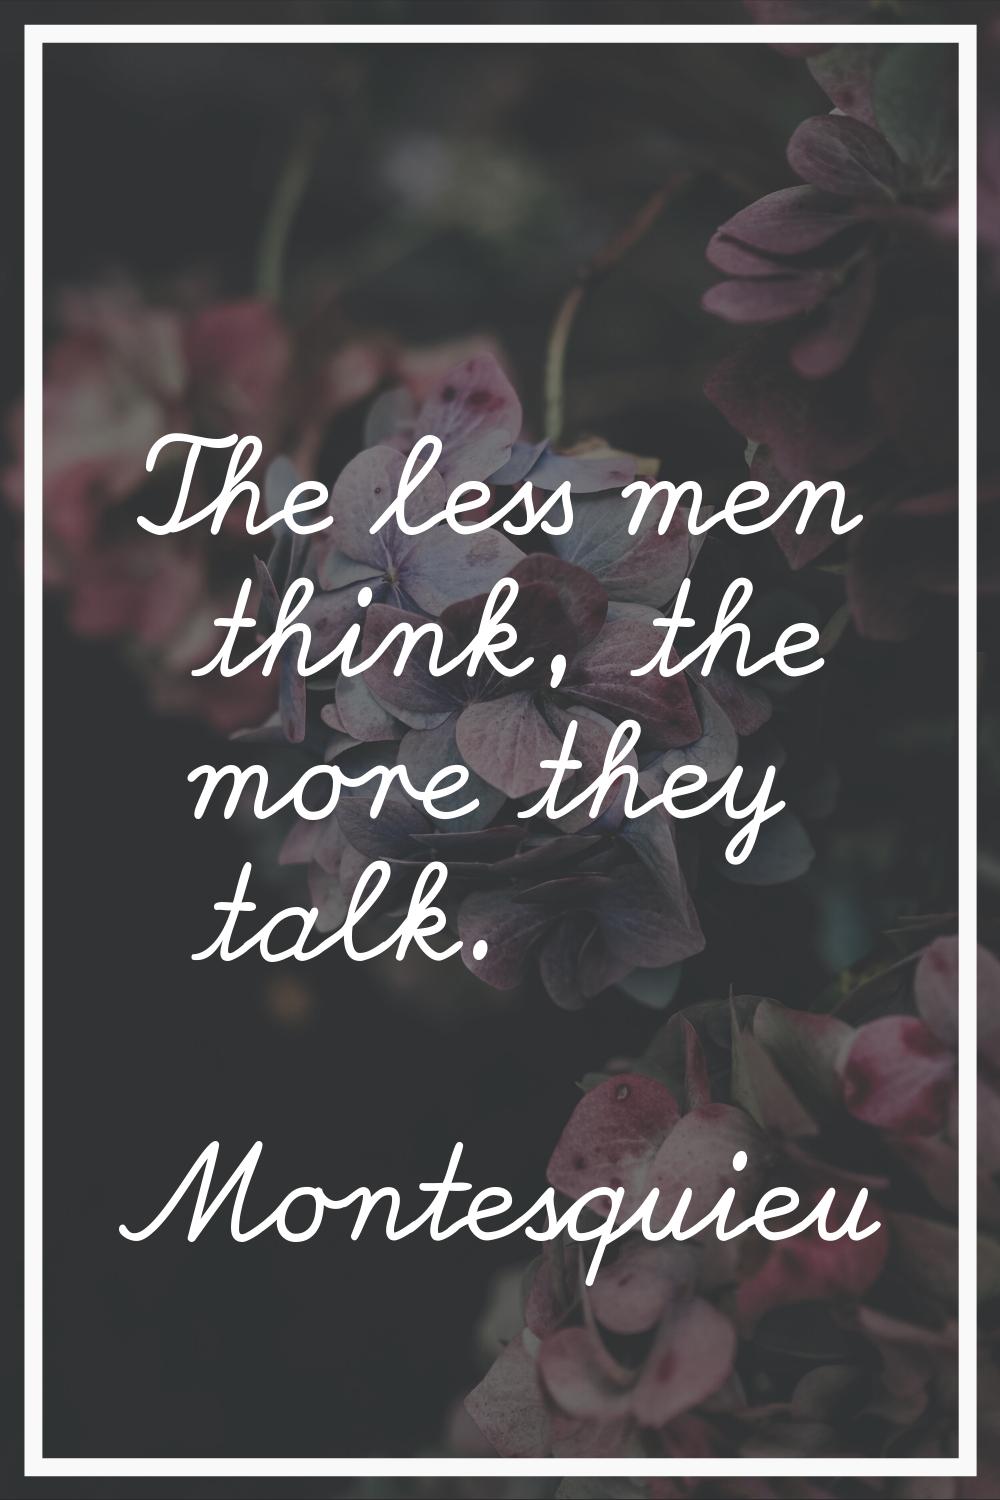 The less men think, the more they talk.